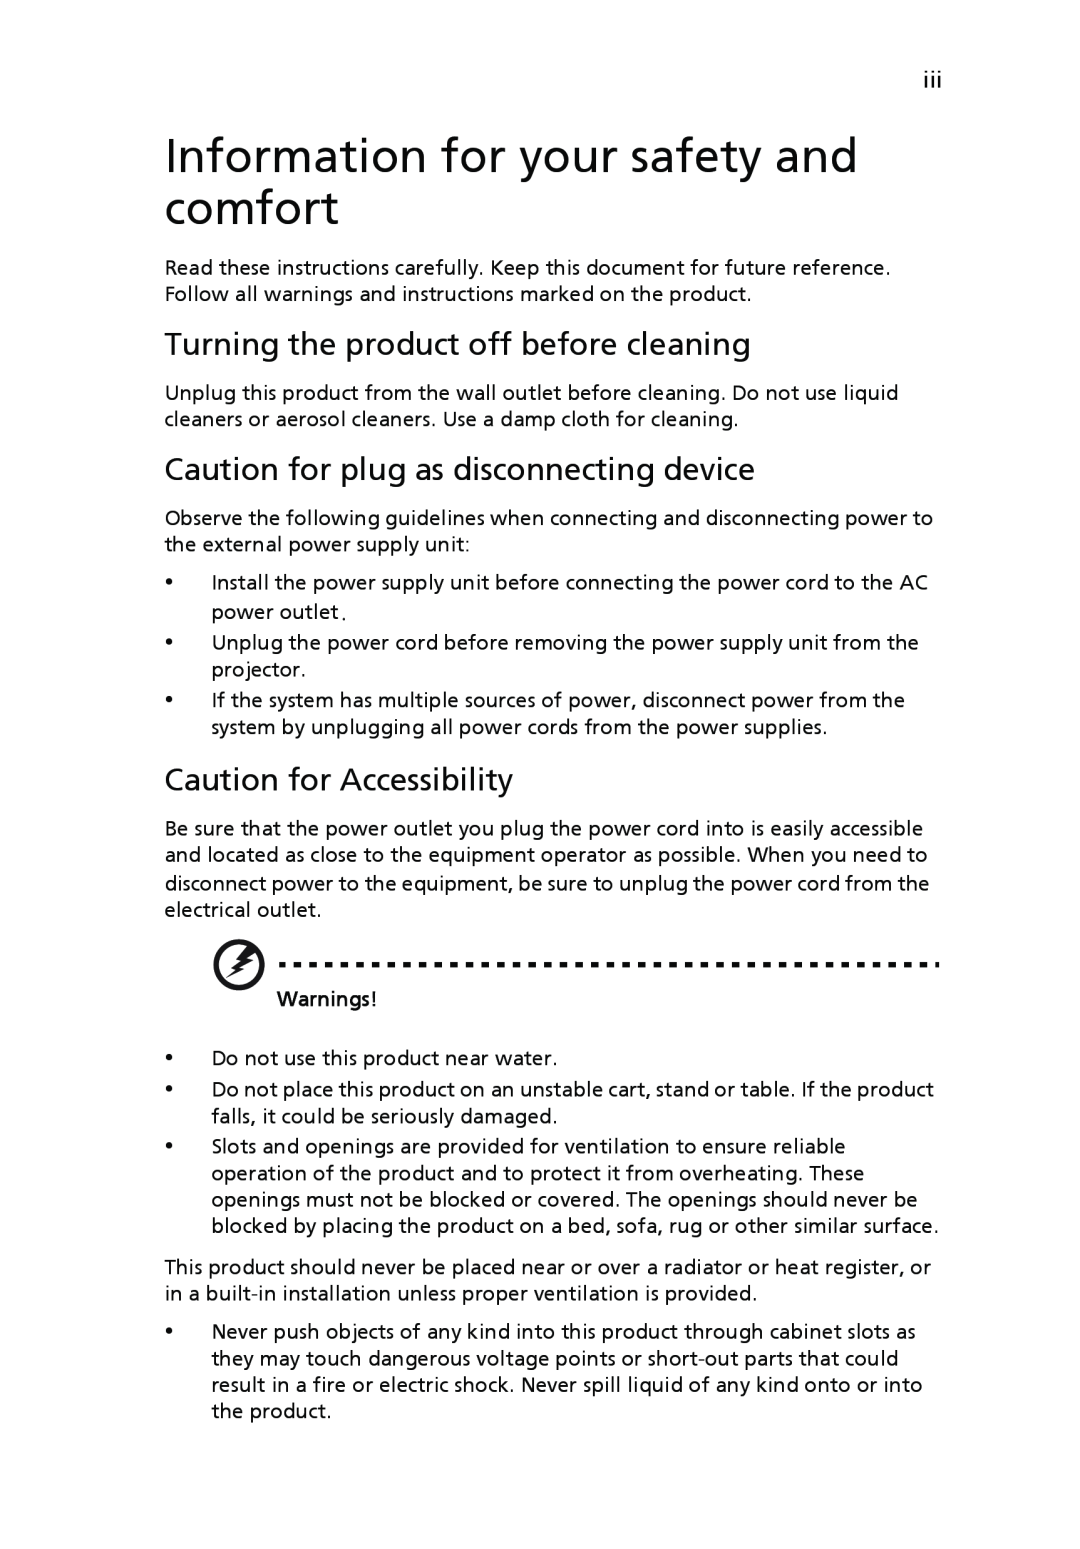 Acer X1161A Information for your safety and comfort, Turning the product off before cleaning, Caution for Accessibility 